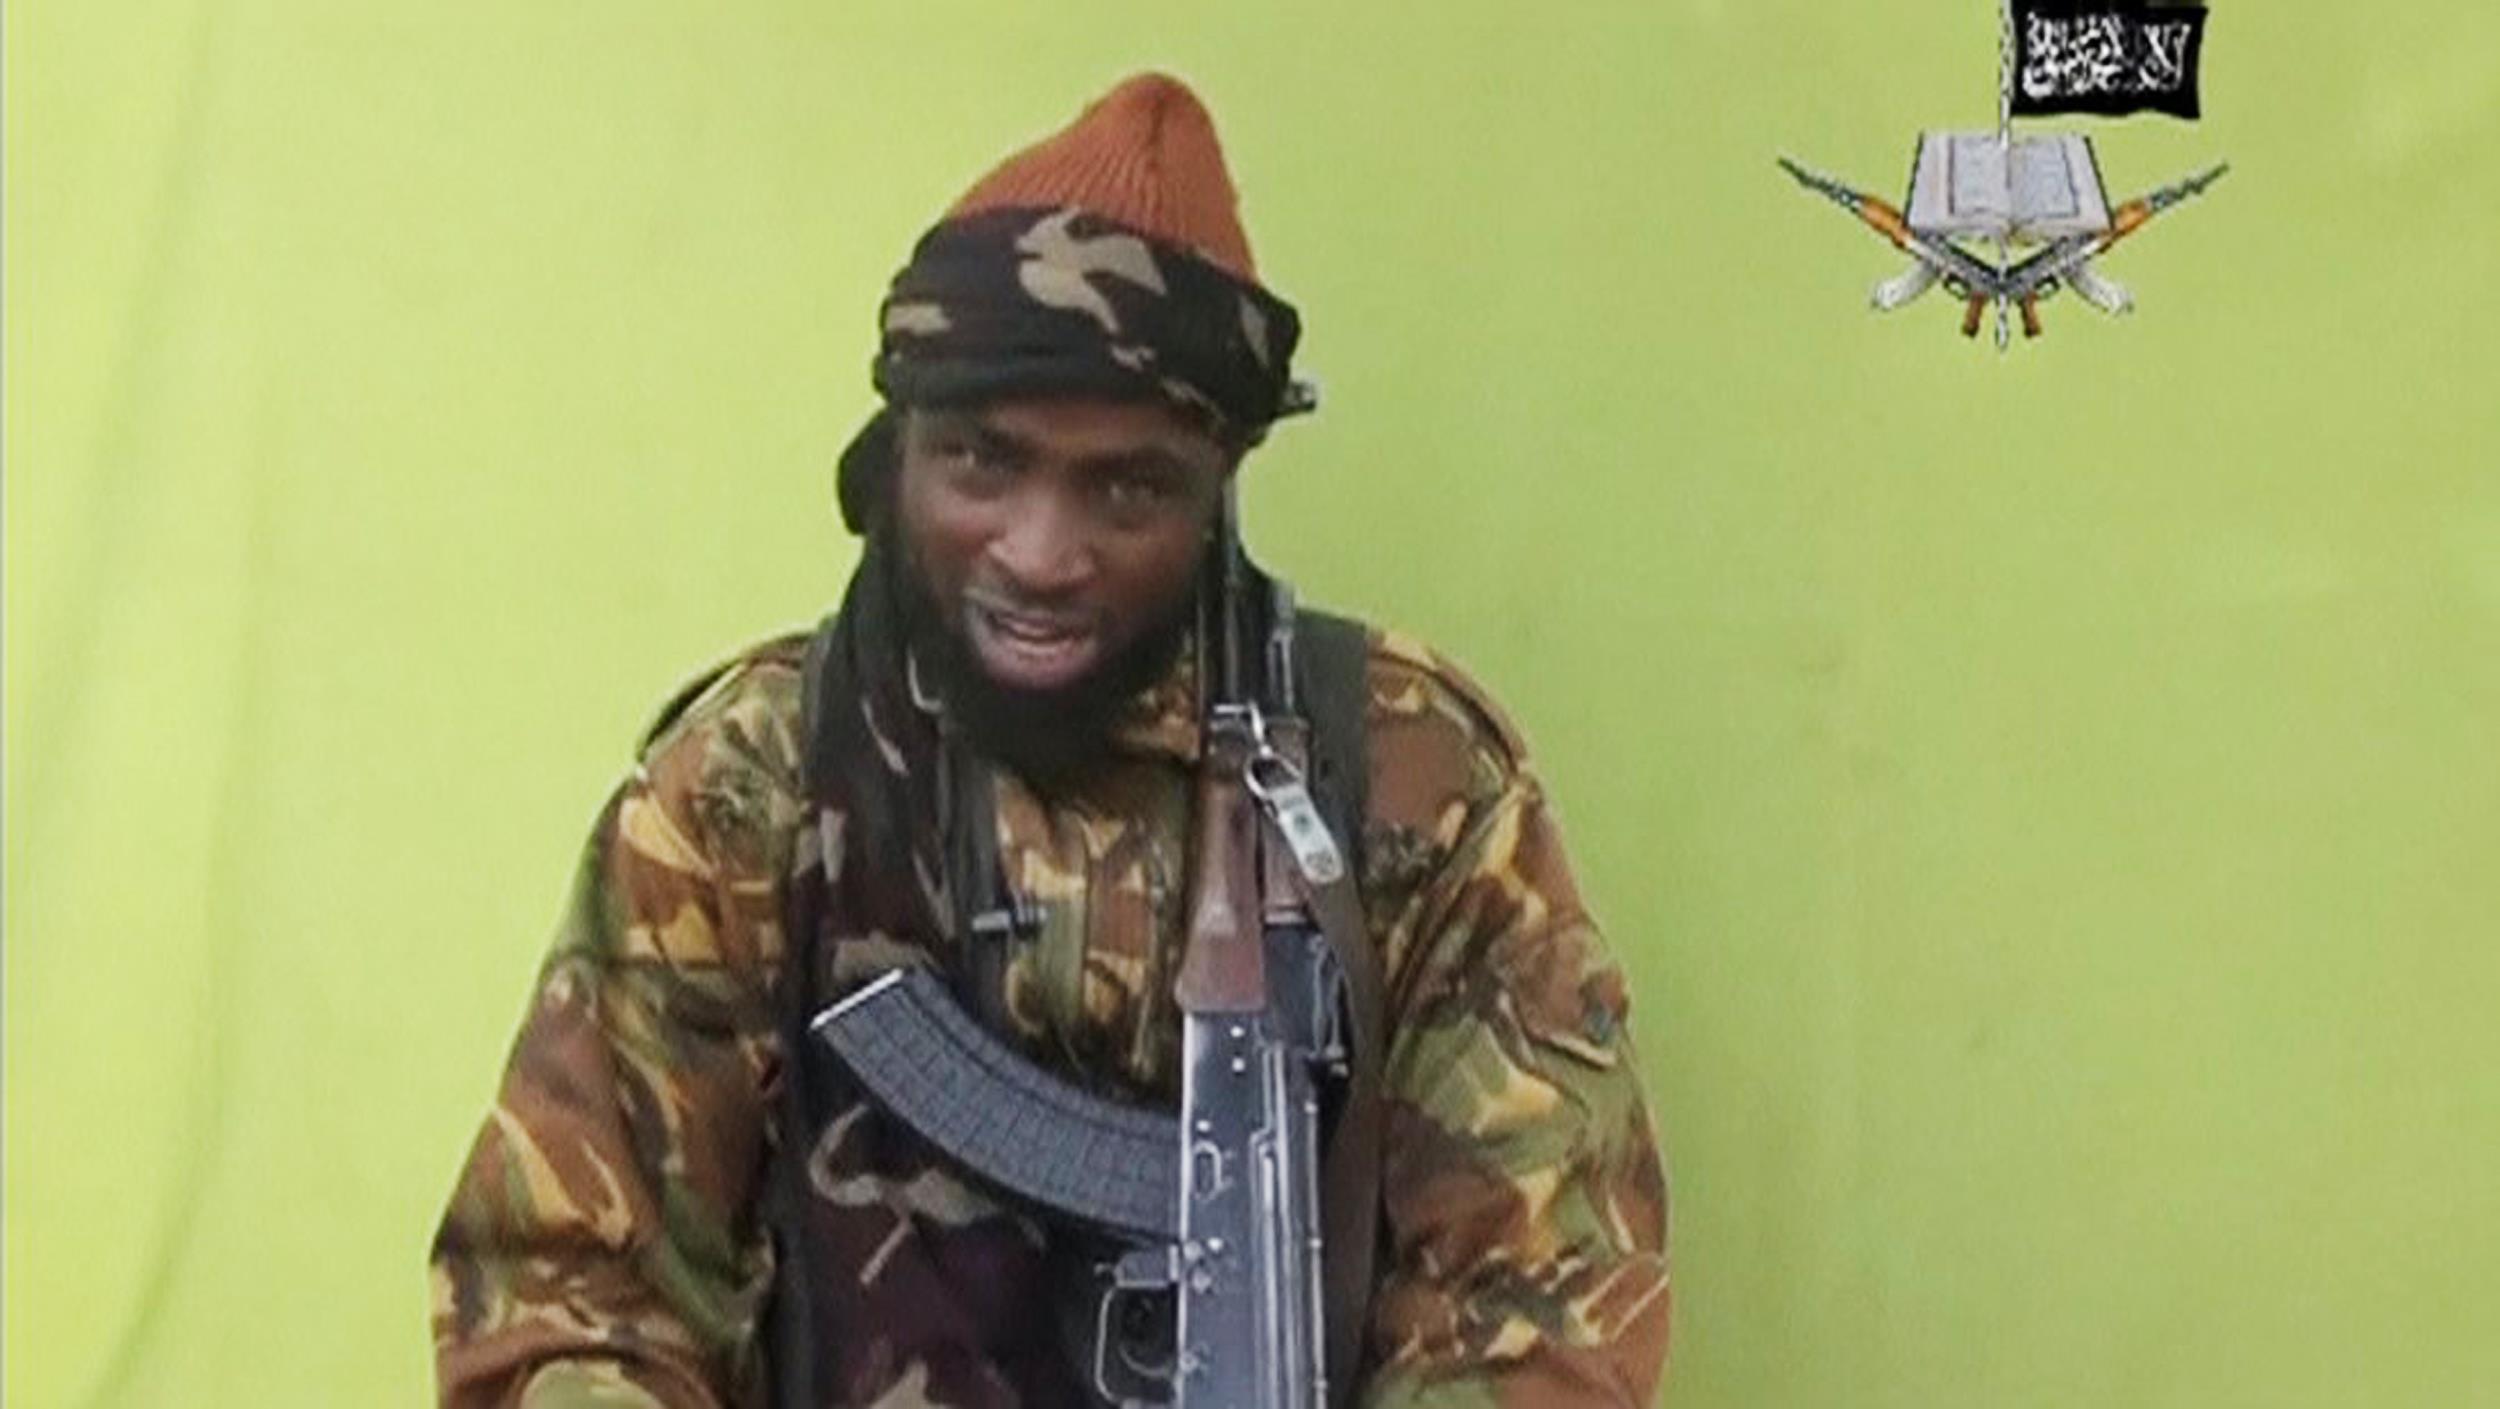 Boko Haram’s Shekau Vows to Fight on in New Video